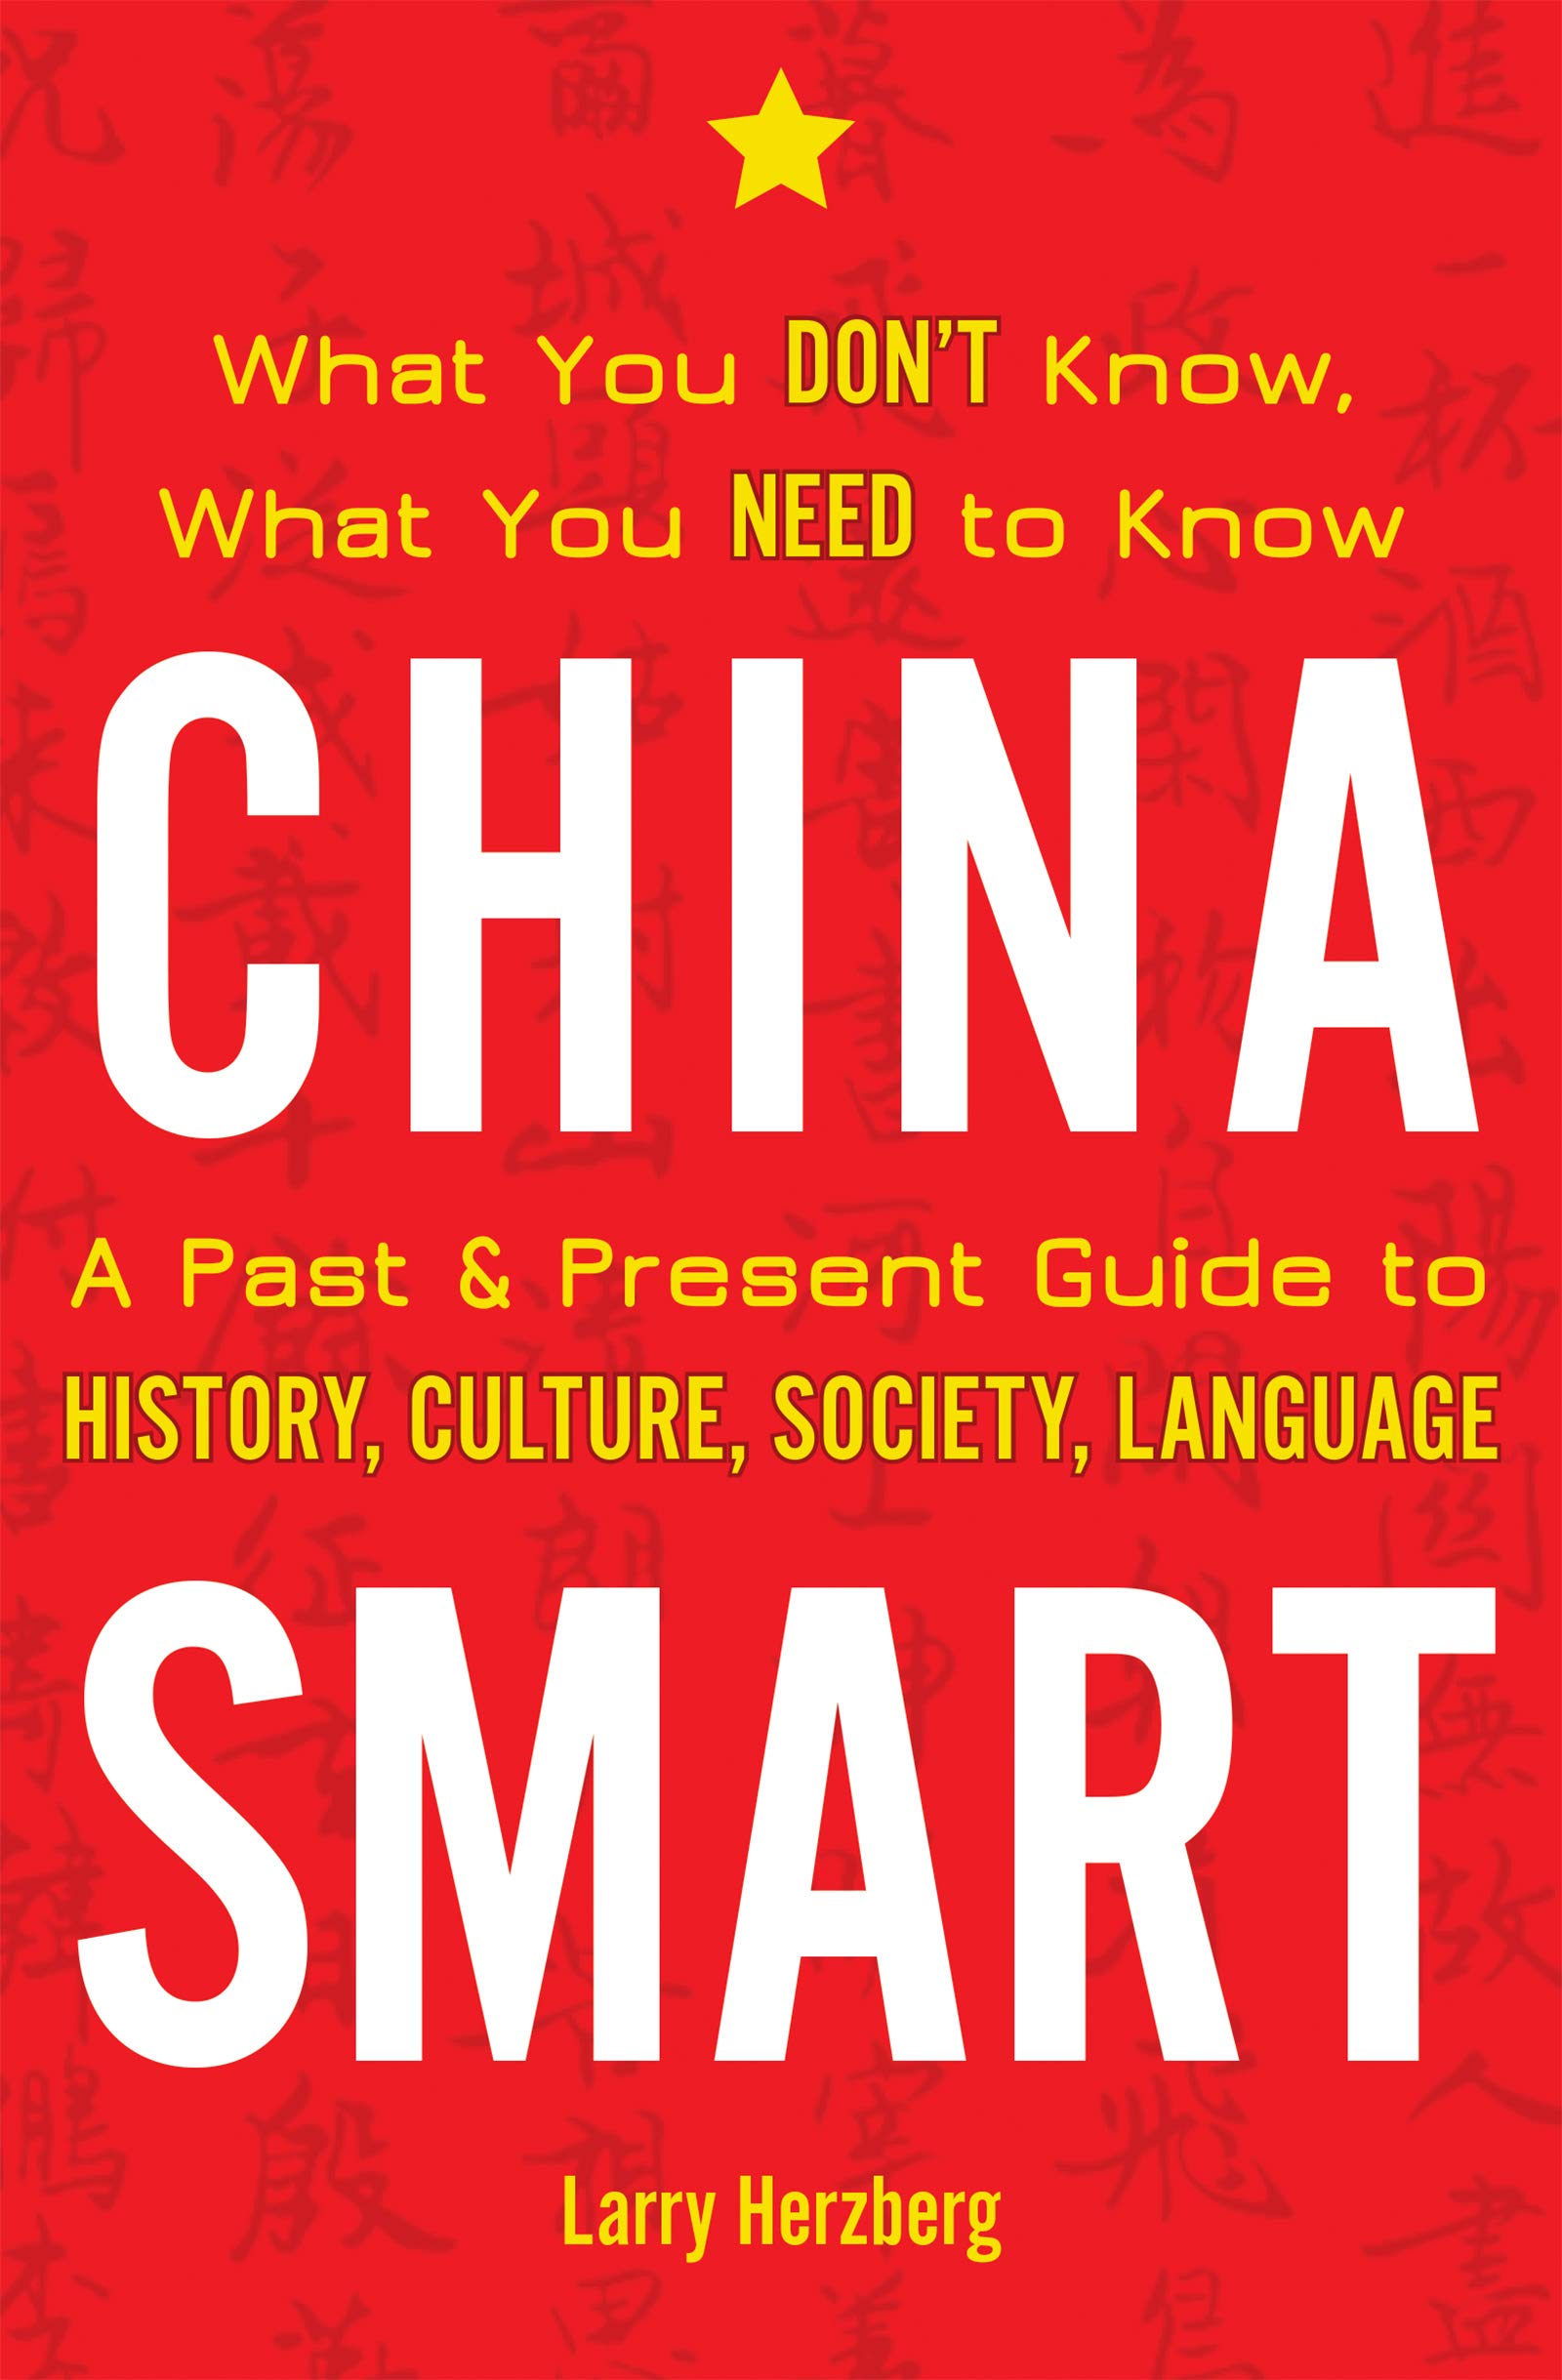 China Smart: What You Don't Know, What You Need to Know -  A Past & Present Guide to History, Culture, Society, Language